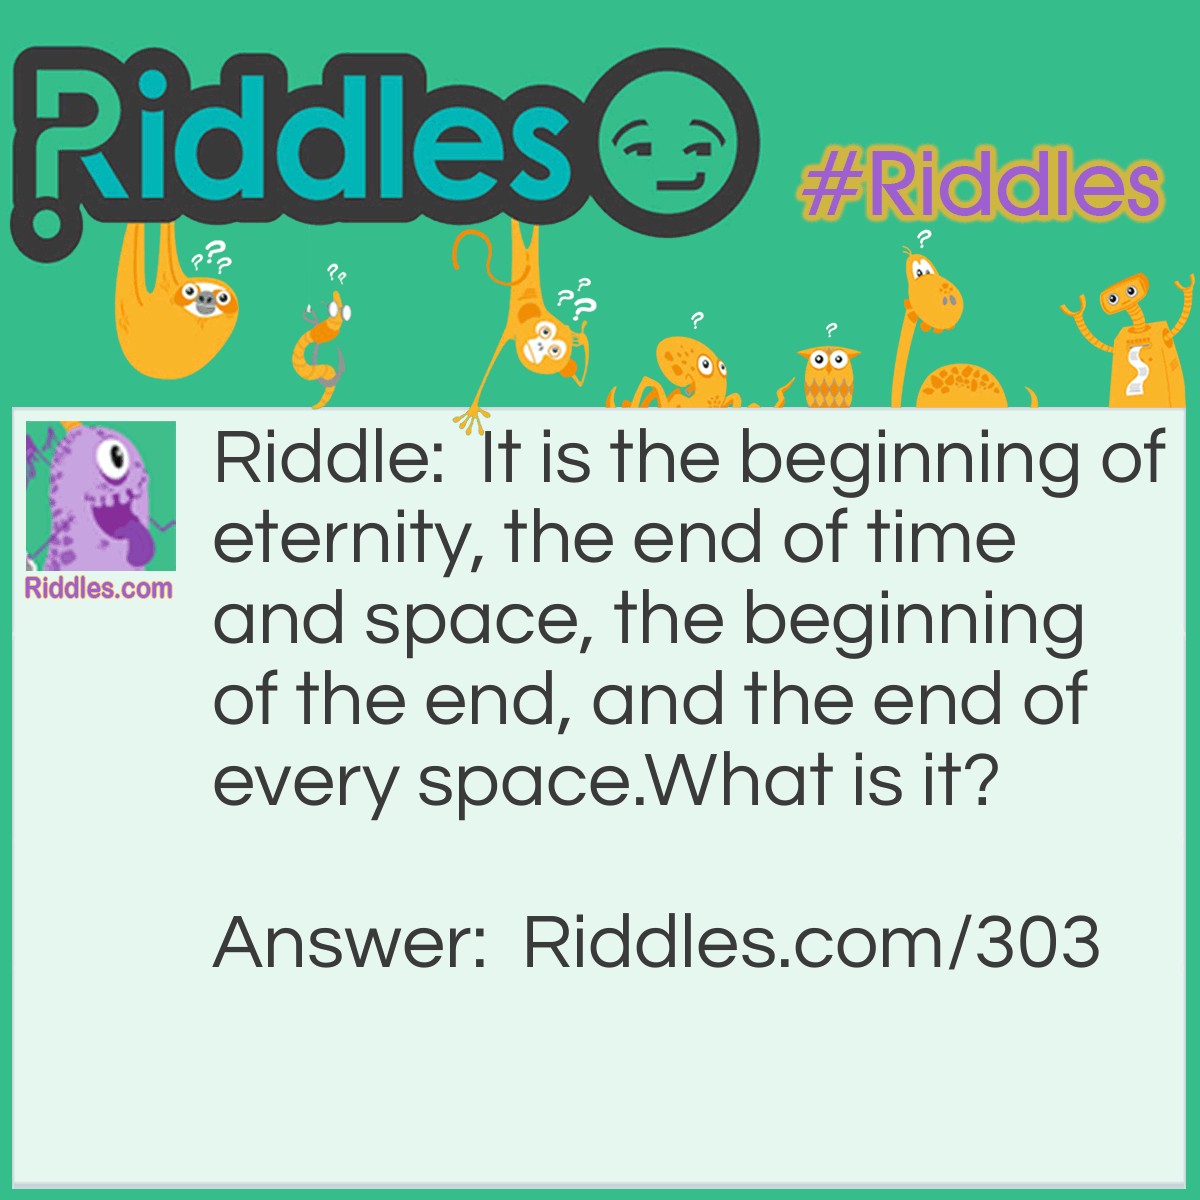 Riddle: It is the beginning of eternity, the end of time and space, the beginning of the end, and the end of every space. What is it? Answer: The Letter E.